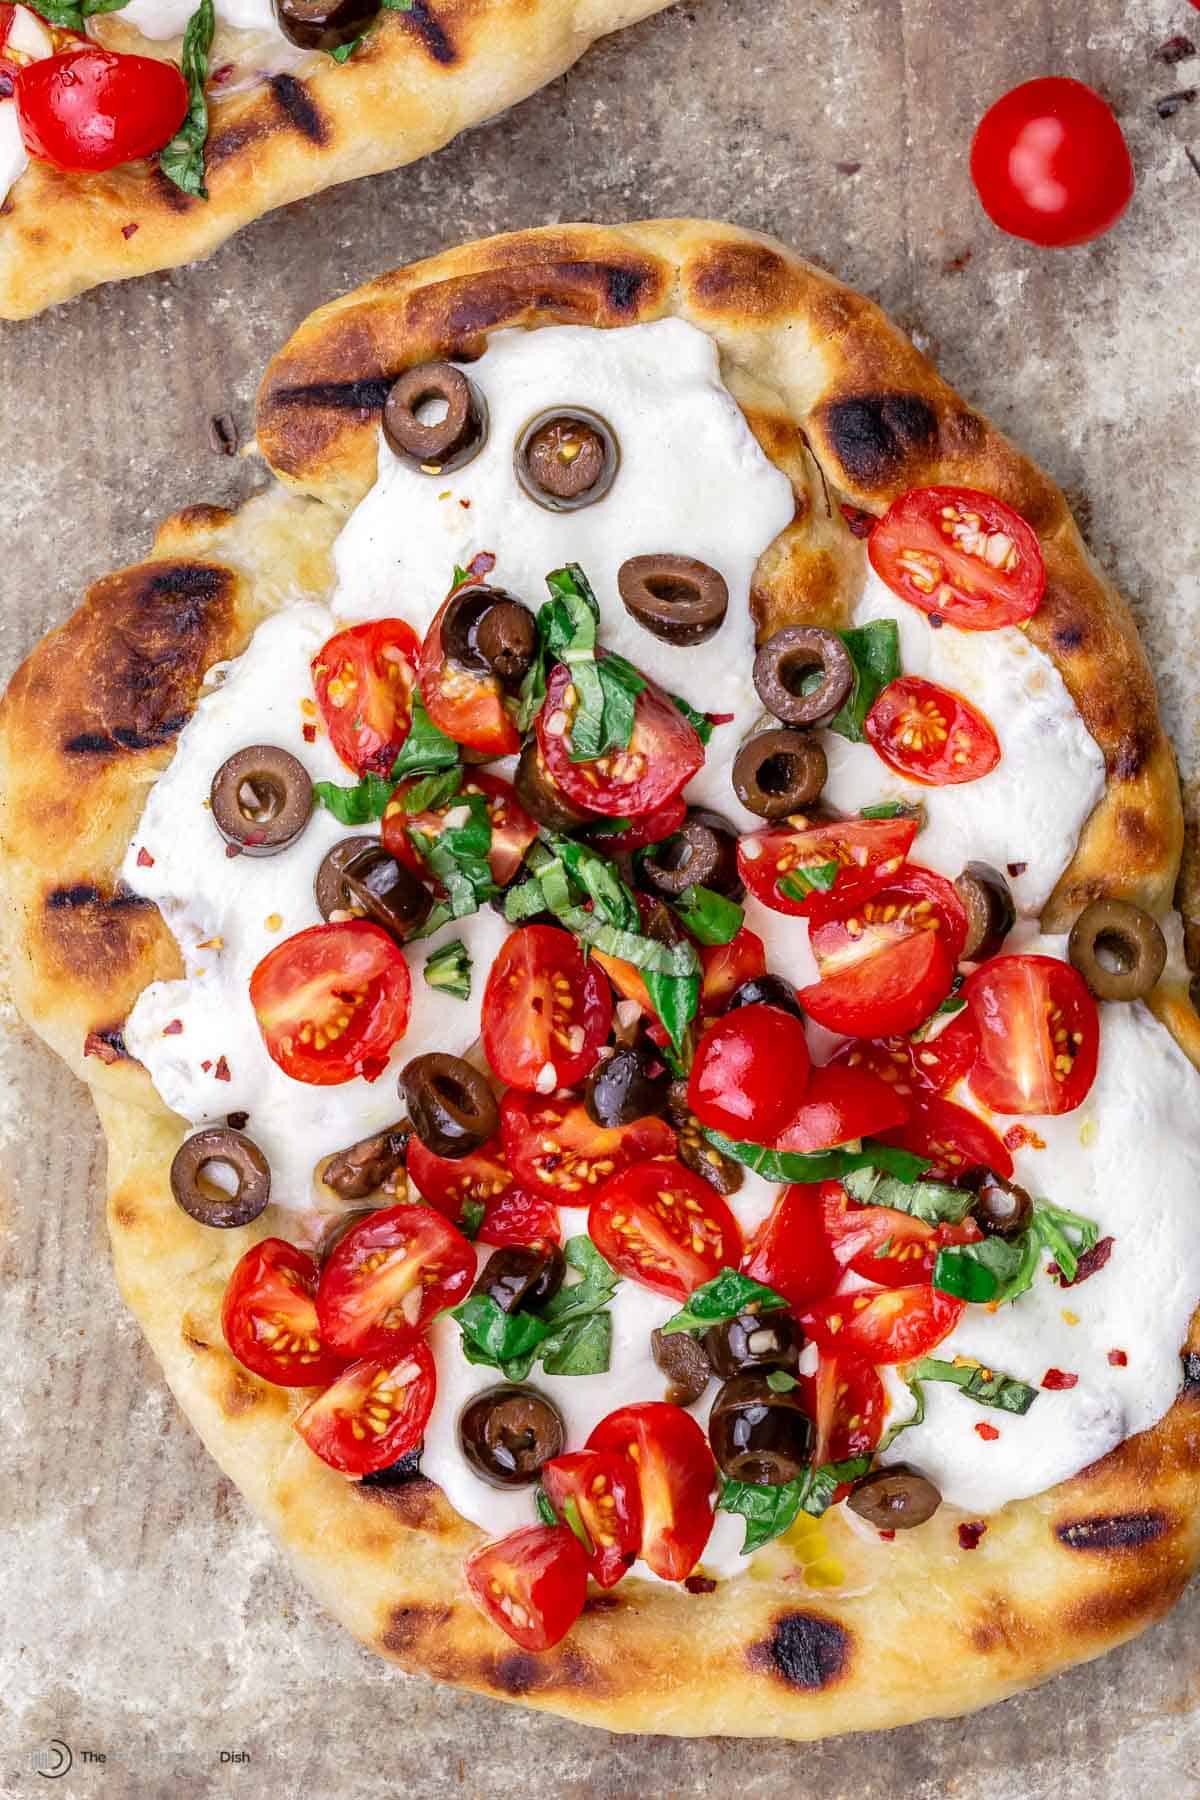 How to make a healthy grilled pizza